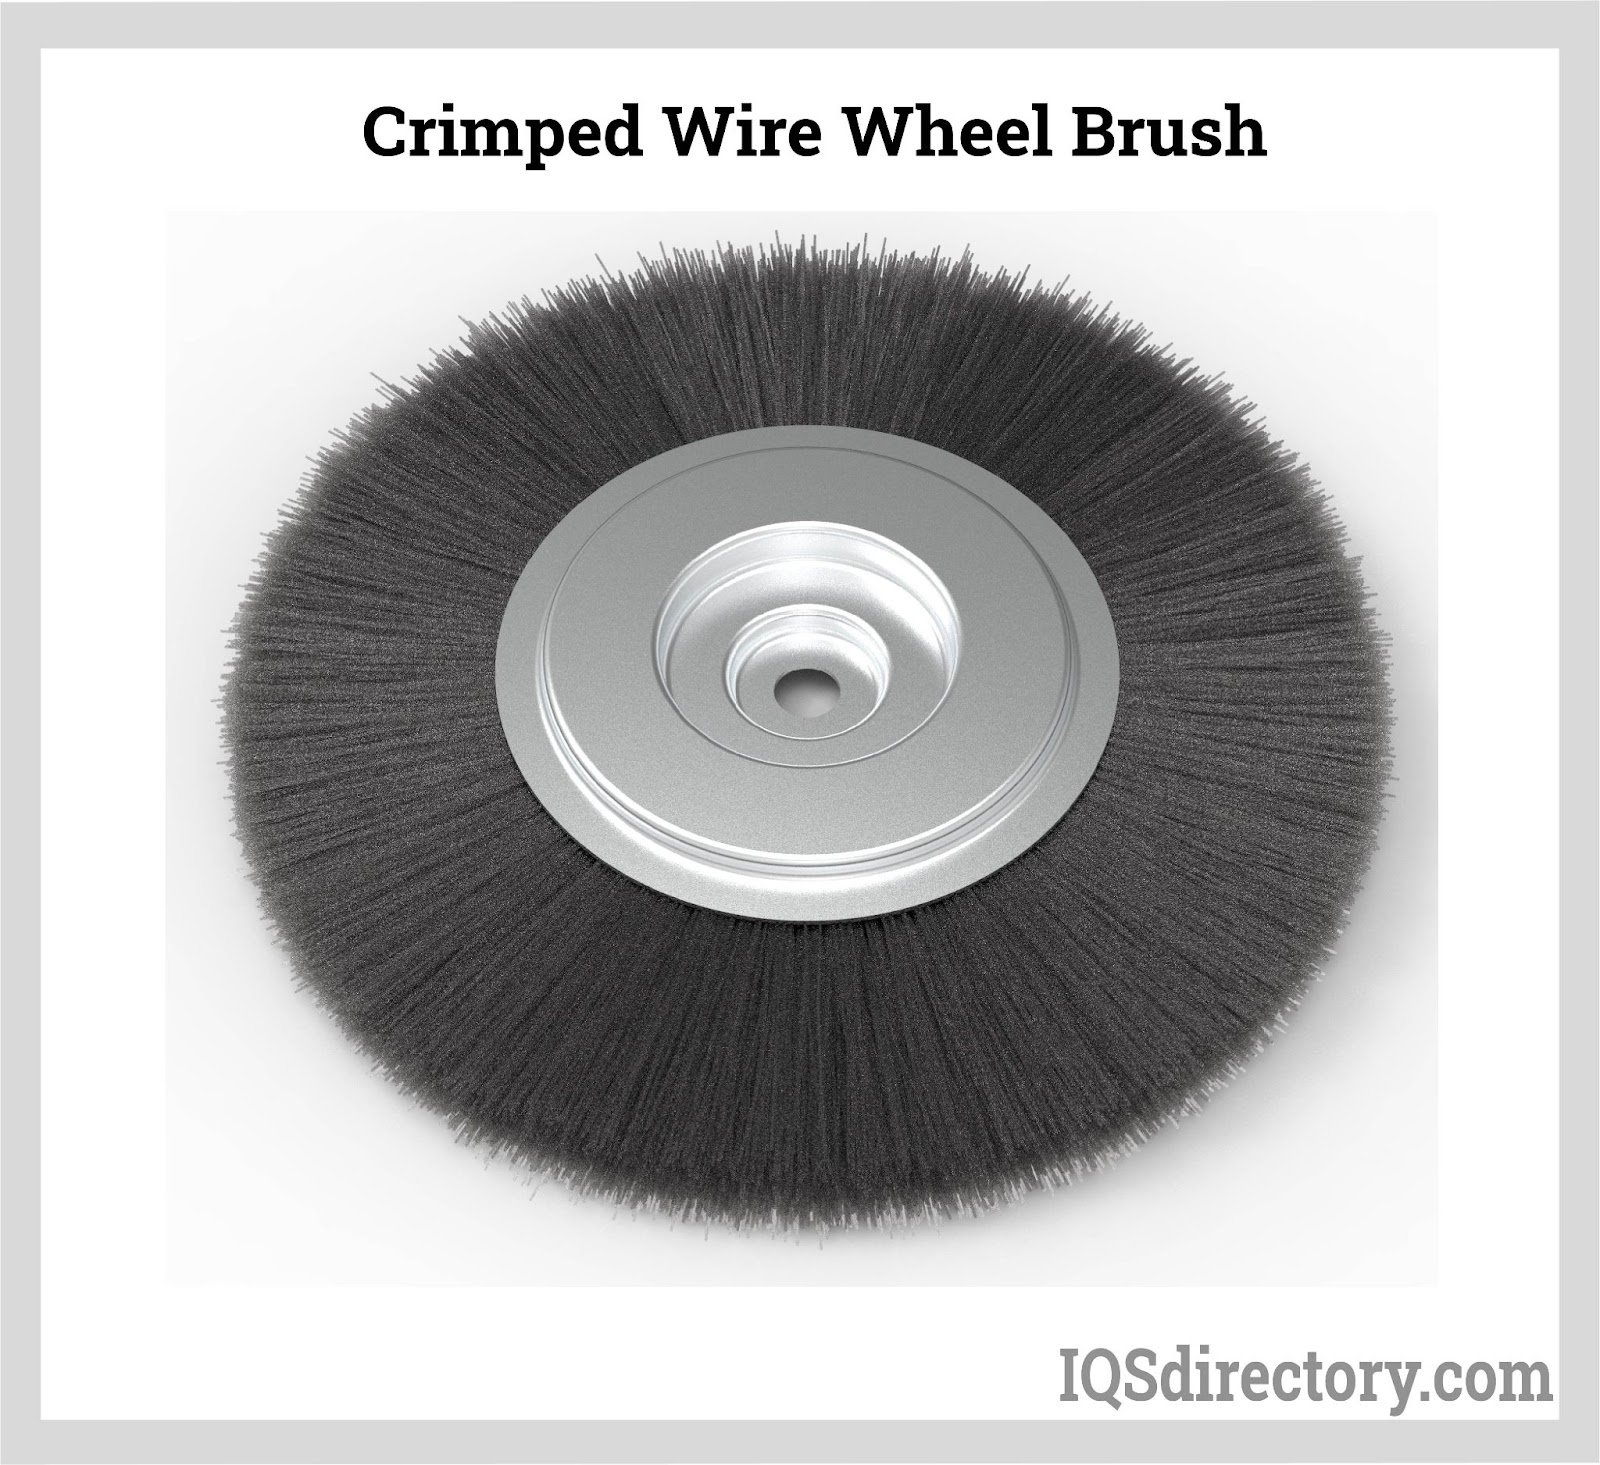 Wire Brush: What Is It? How Is It Used? Types Of, Components